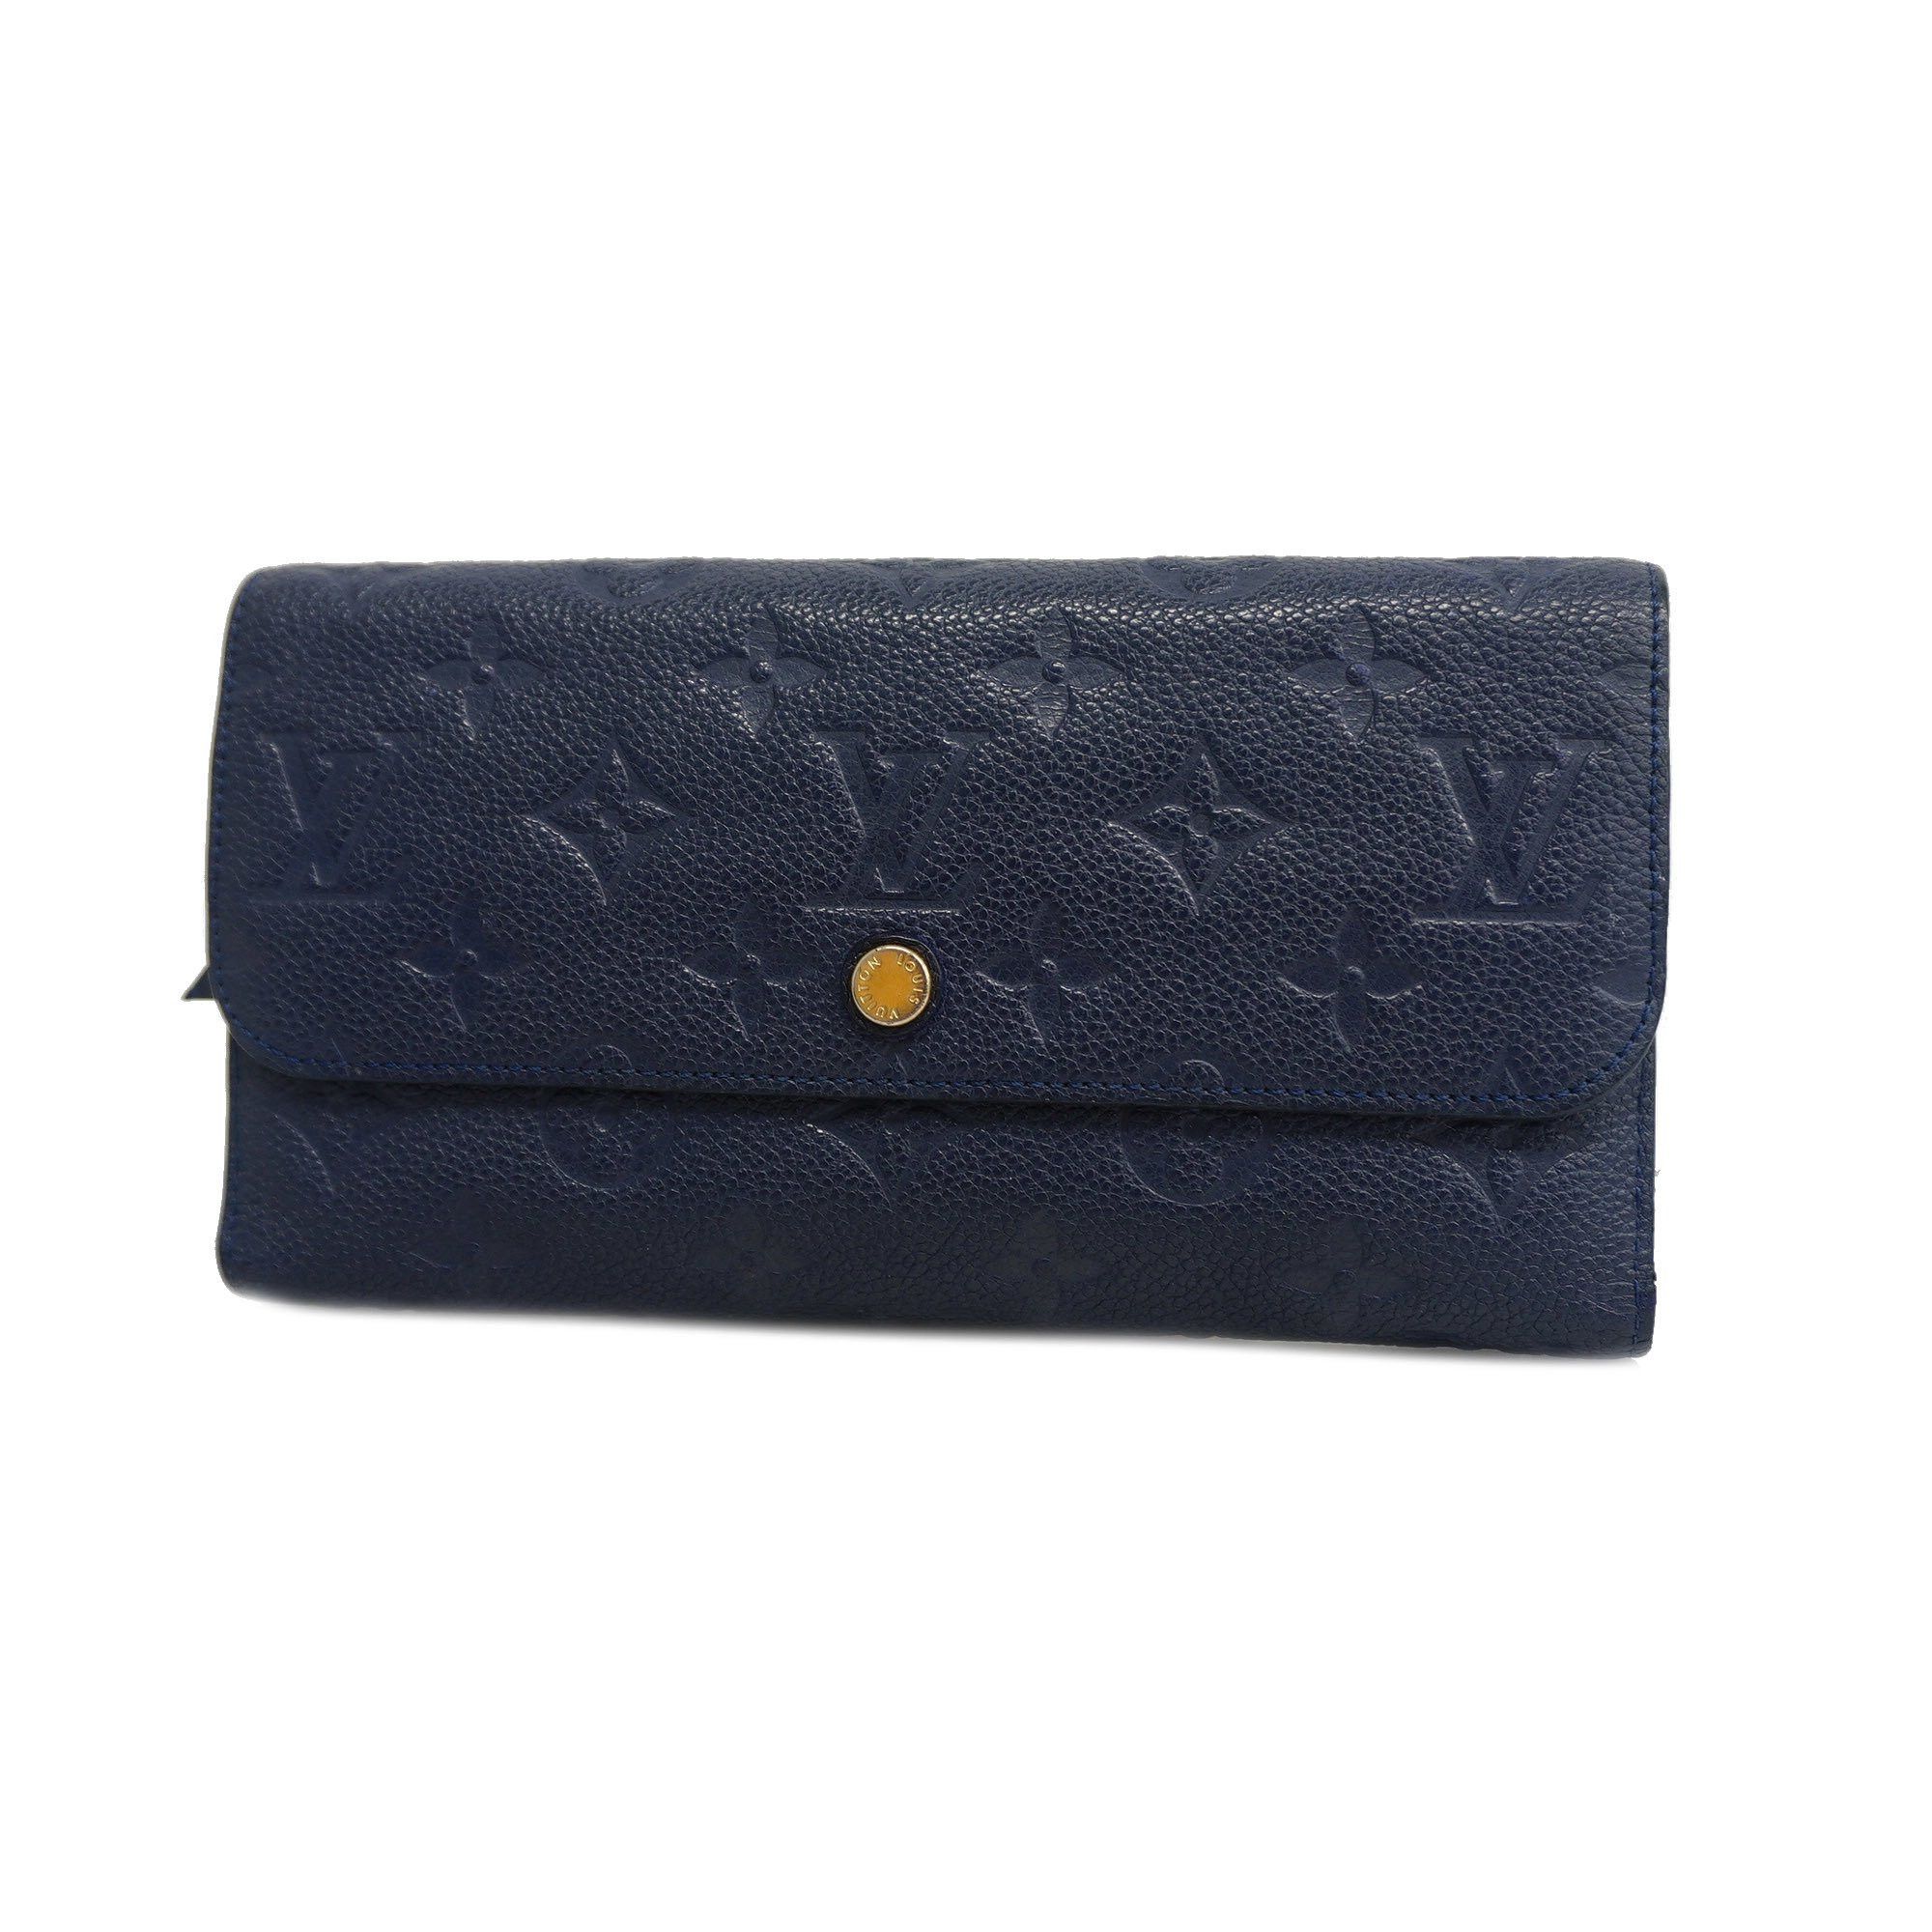 Celeste Wallet Monogram Empreinte Leather - Wallets and Small Leather Goods